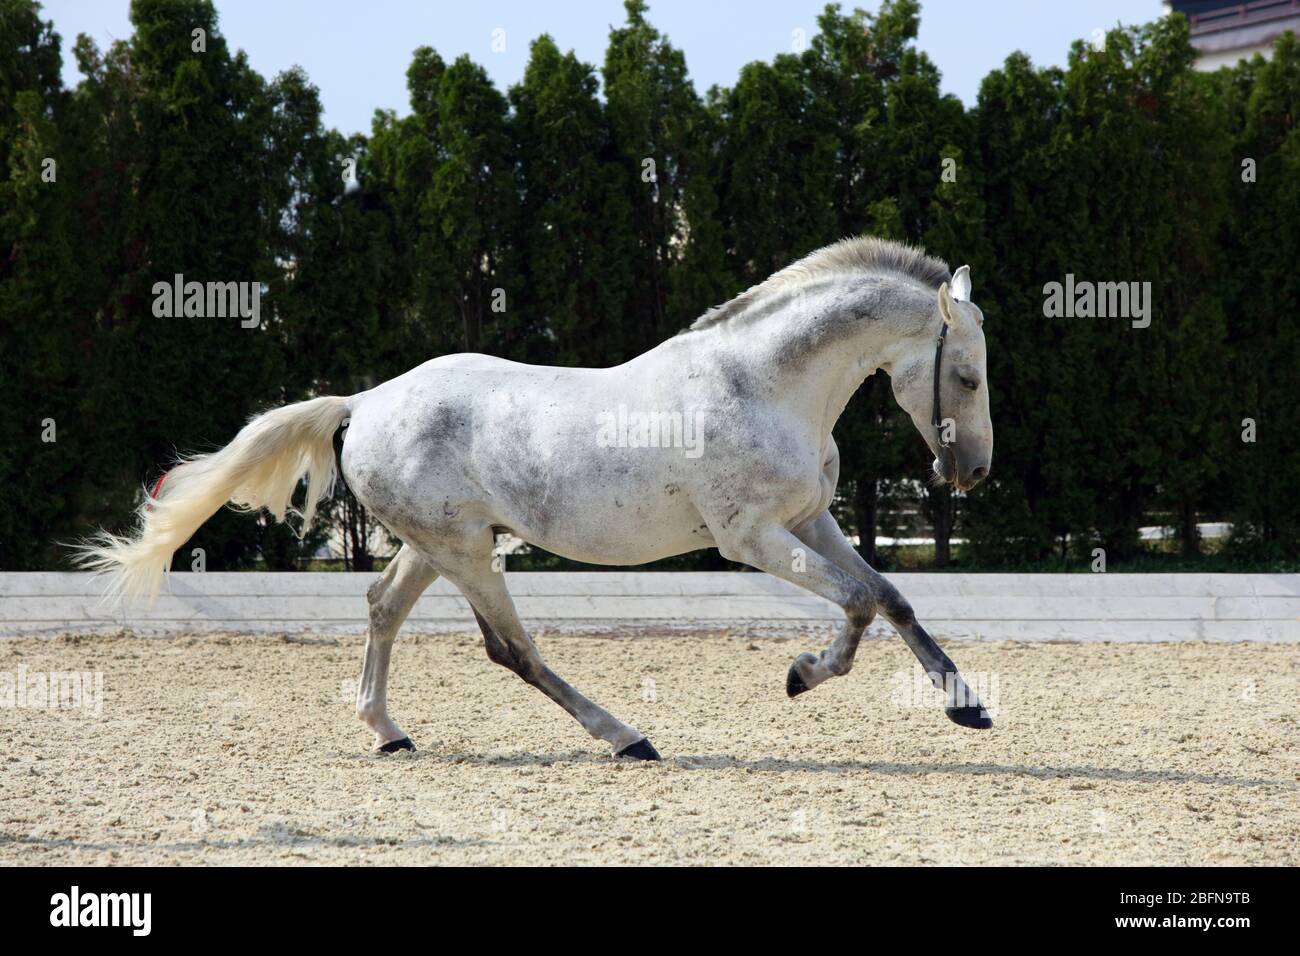 Andalusian white horse galloping on dressage arena Stock Photo